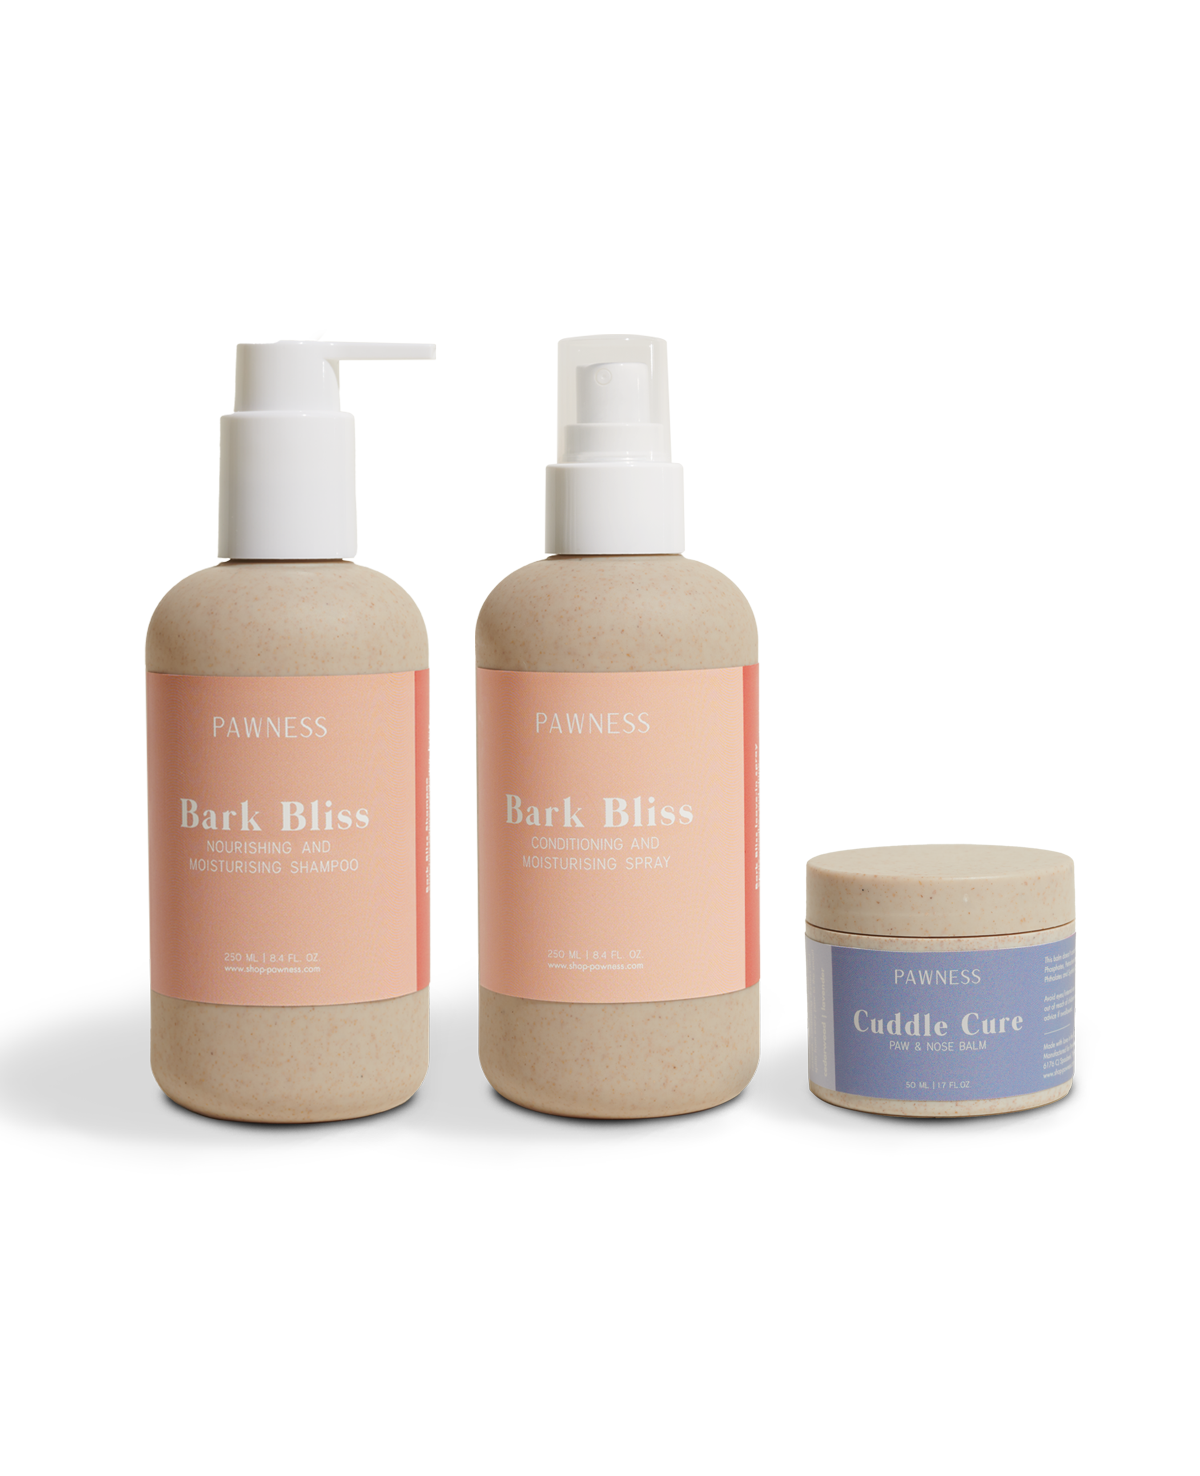 Back to Basics Collection: Body wash, lotion, and body butter. A trio of essentials for nourishing and hydrating your skin.